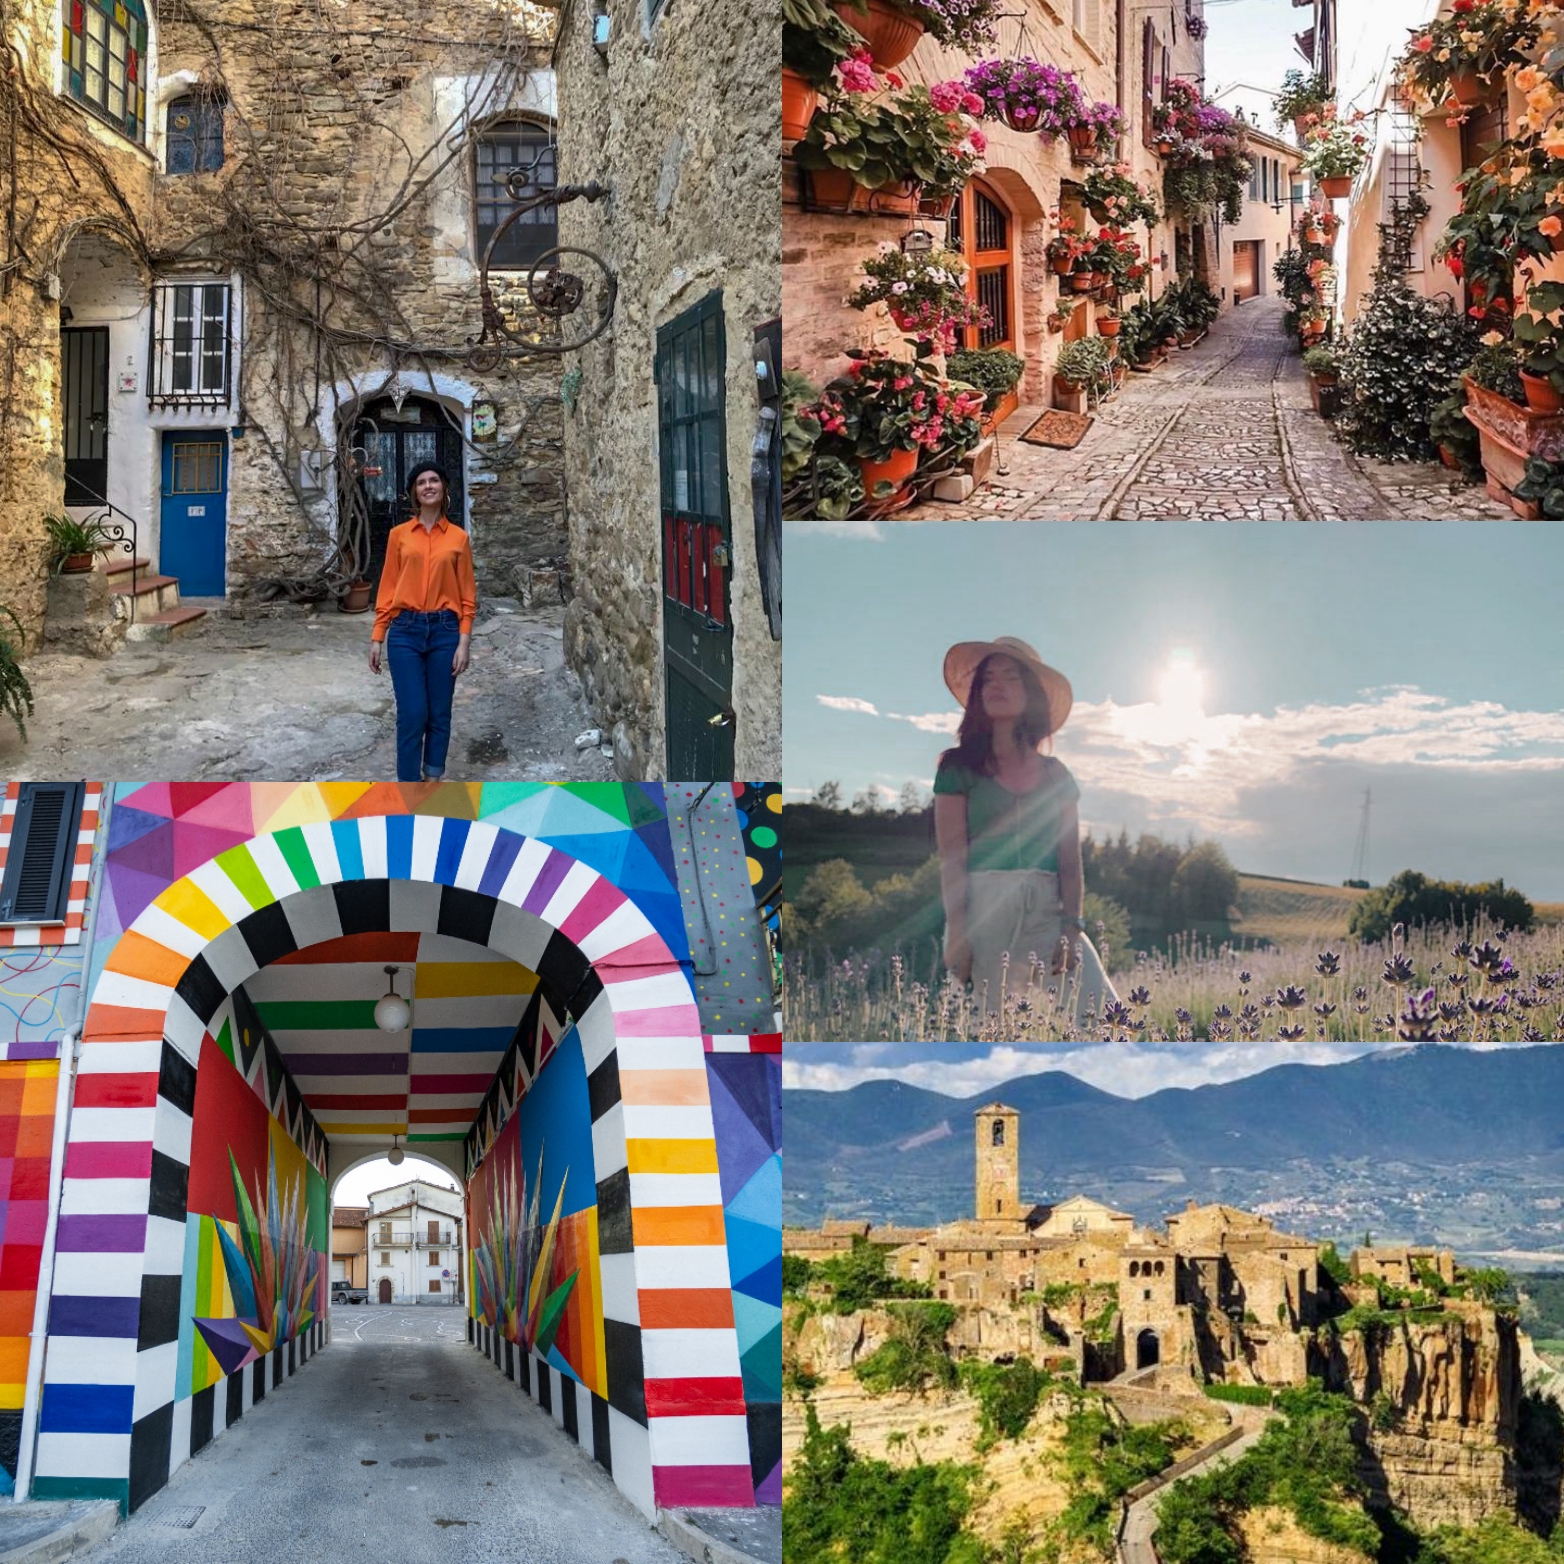 [:it]Luoghi instagrammabili da visitare in italia quest’estate[:en]INSTAGRAMMABLE PLACES TO VISIT IN ITALY THIS SUMMER[:]